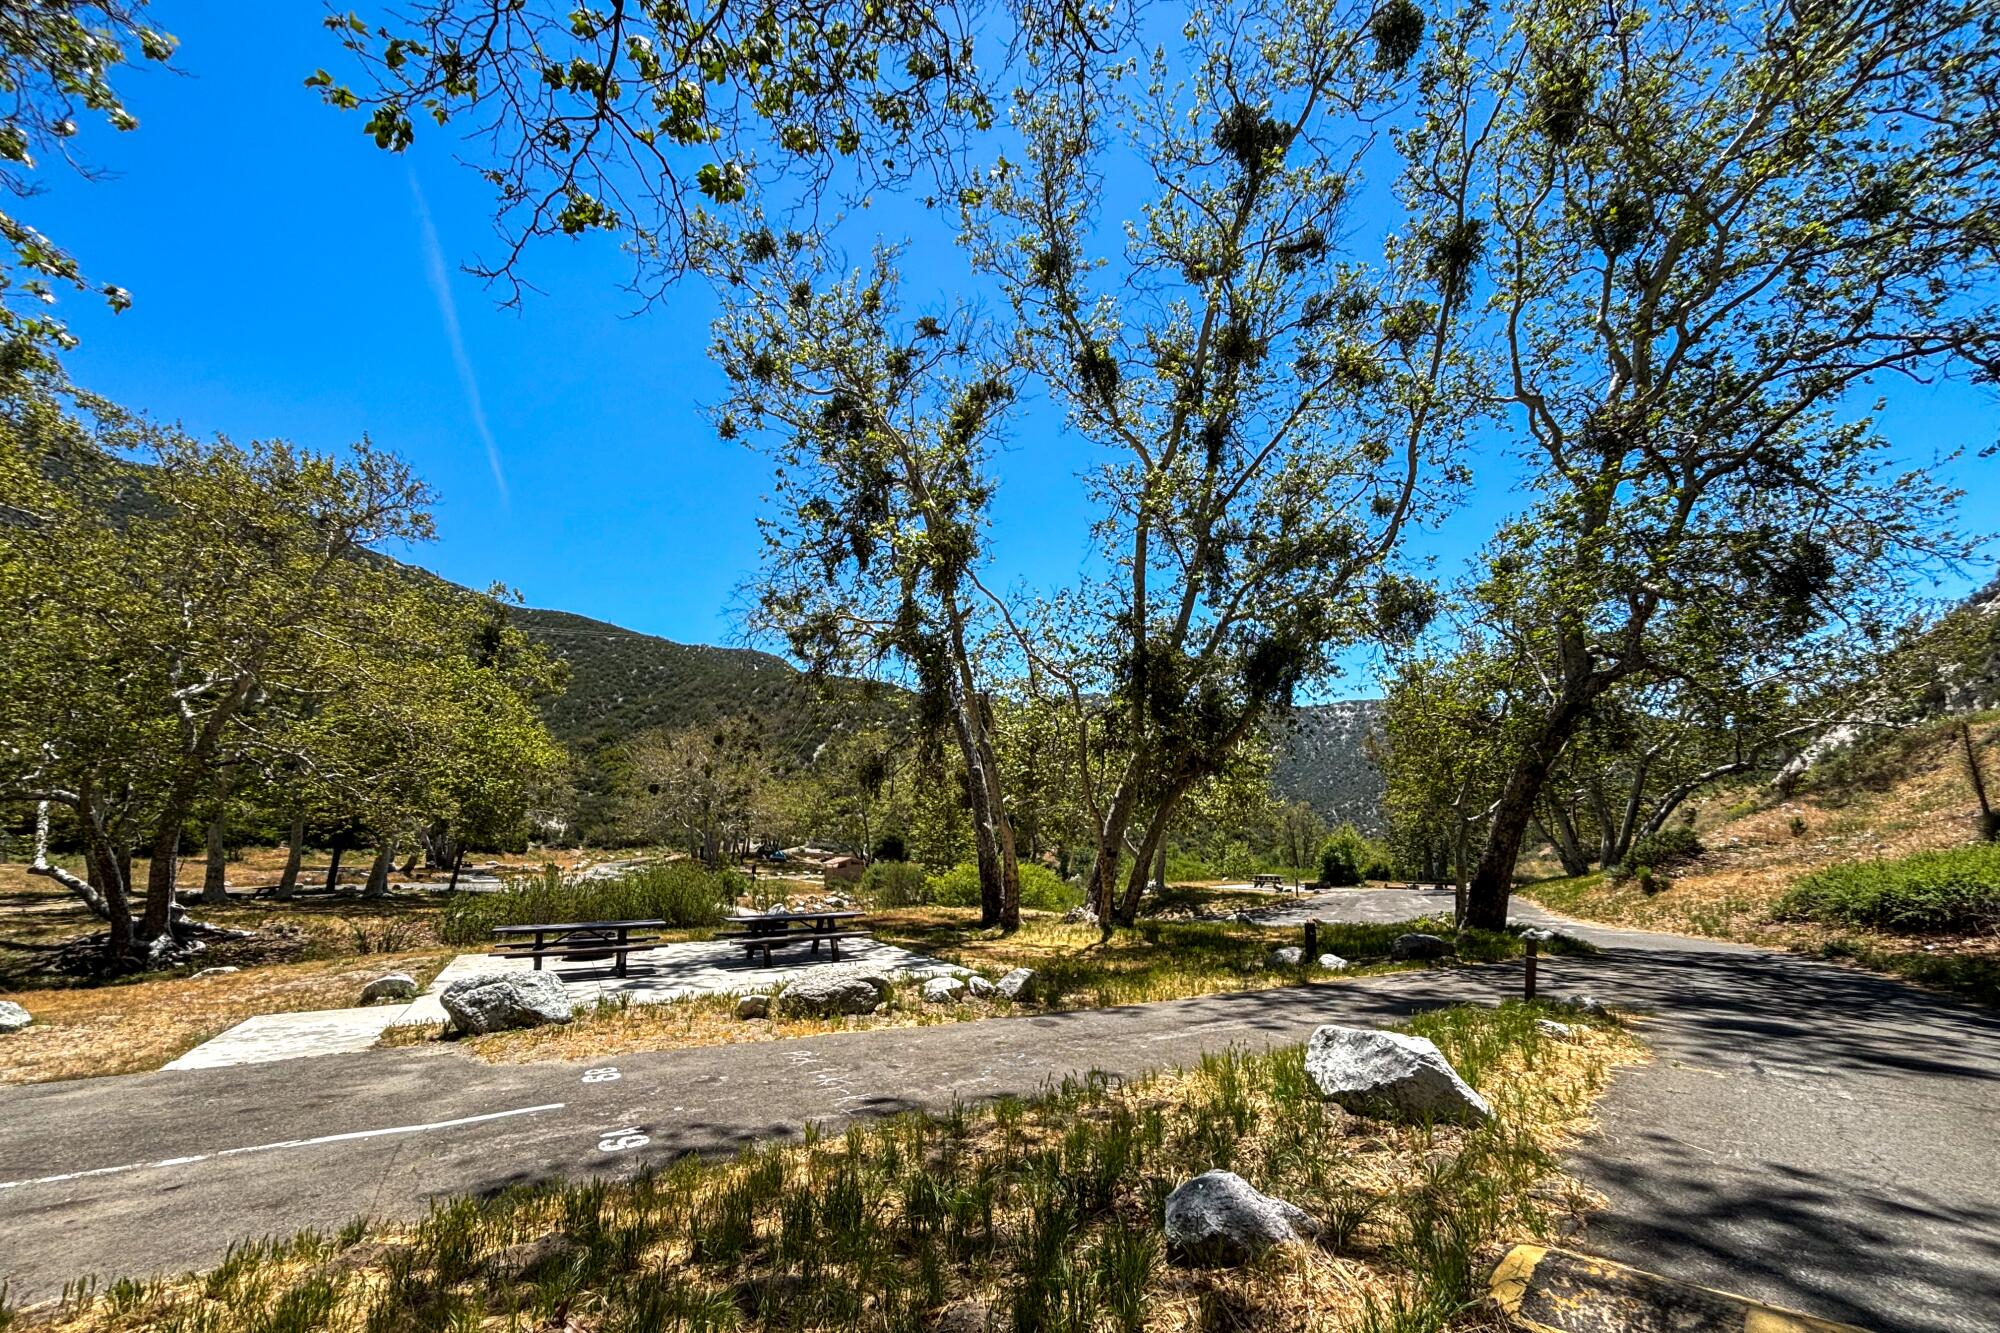 A drive-in campsite with a picnic table and tall sycamore trees